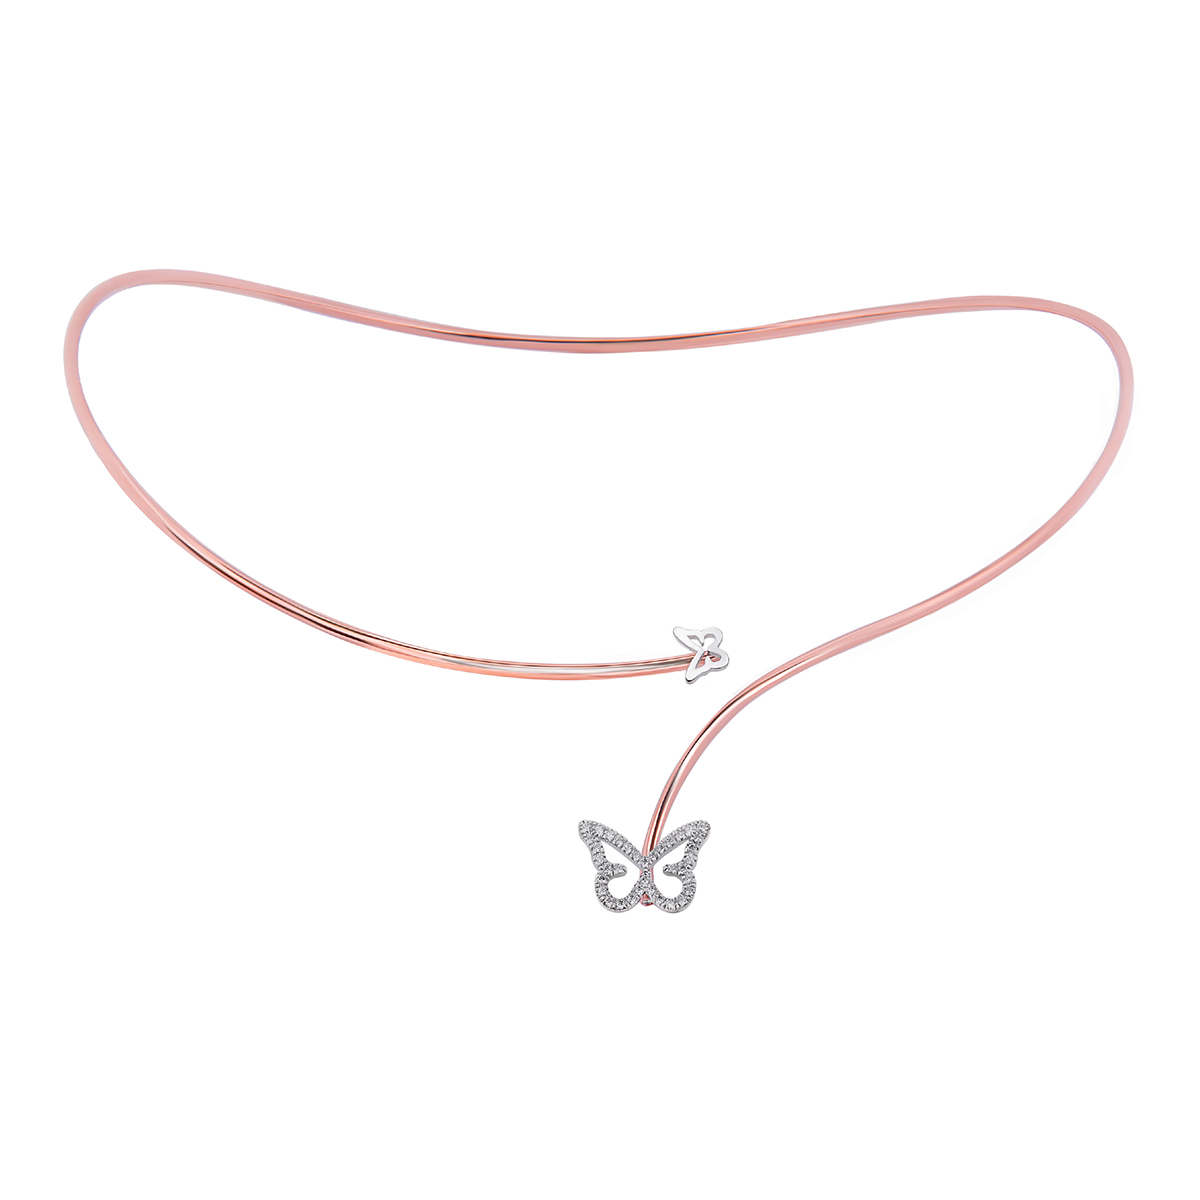 Butterfly Diamond Outline Open Collar Choker Necklace in 18K Rose Gold